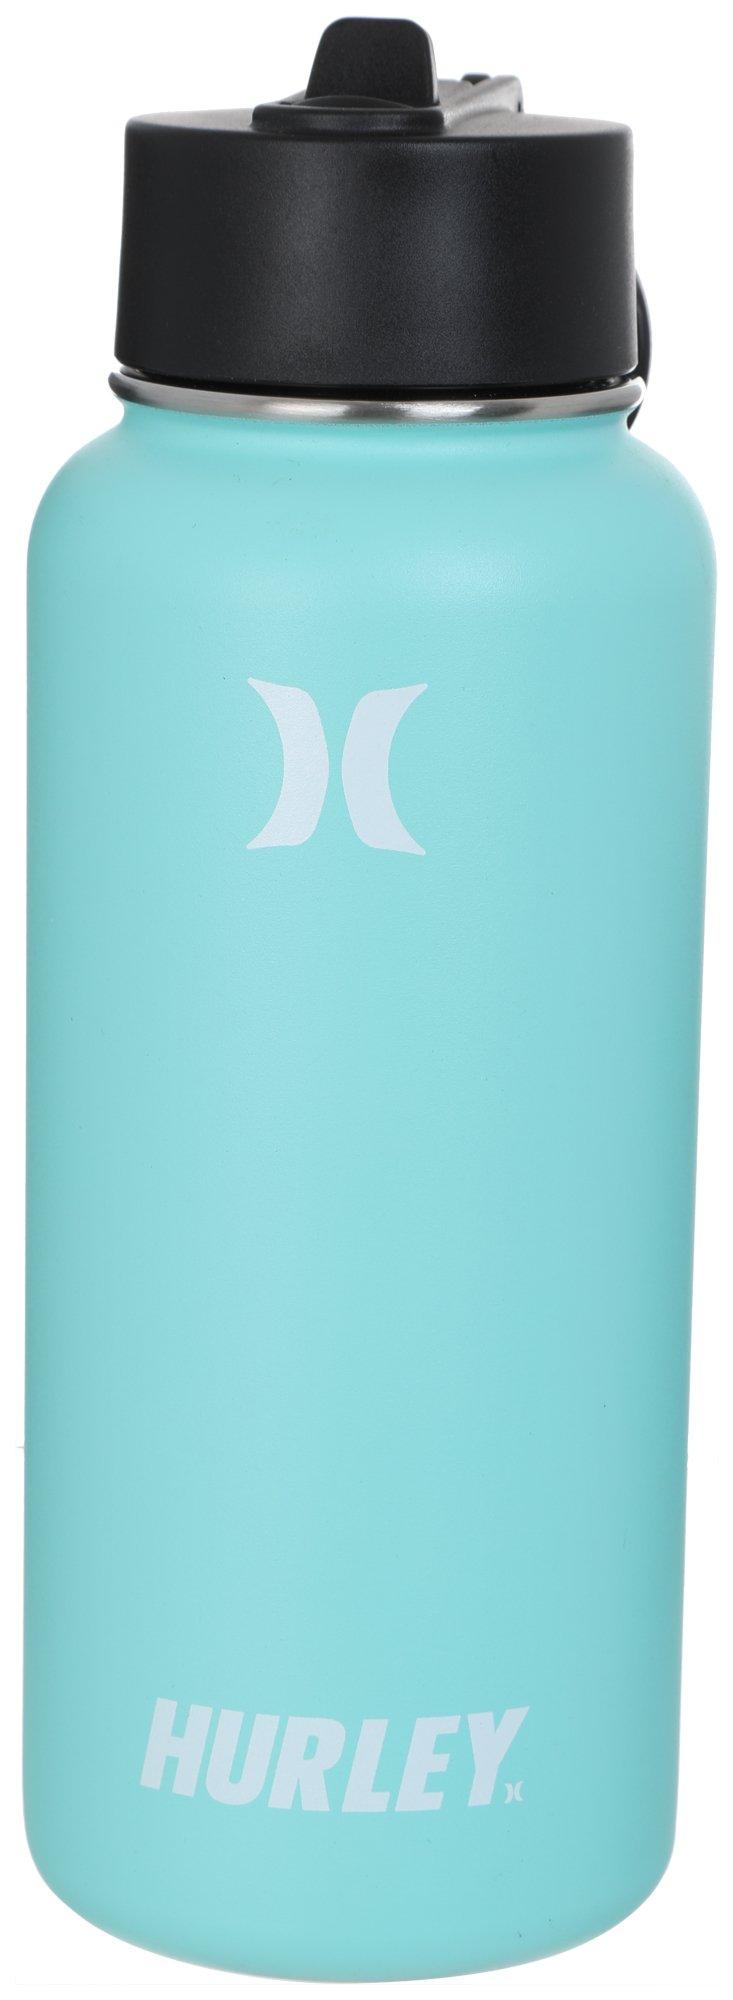 32 oz. Stainless Steel Insulated Bottle